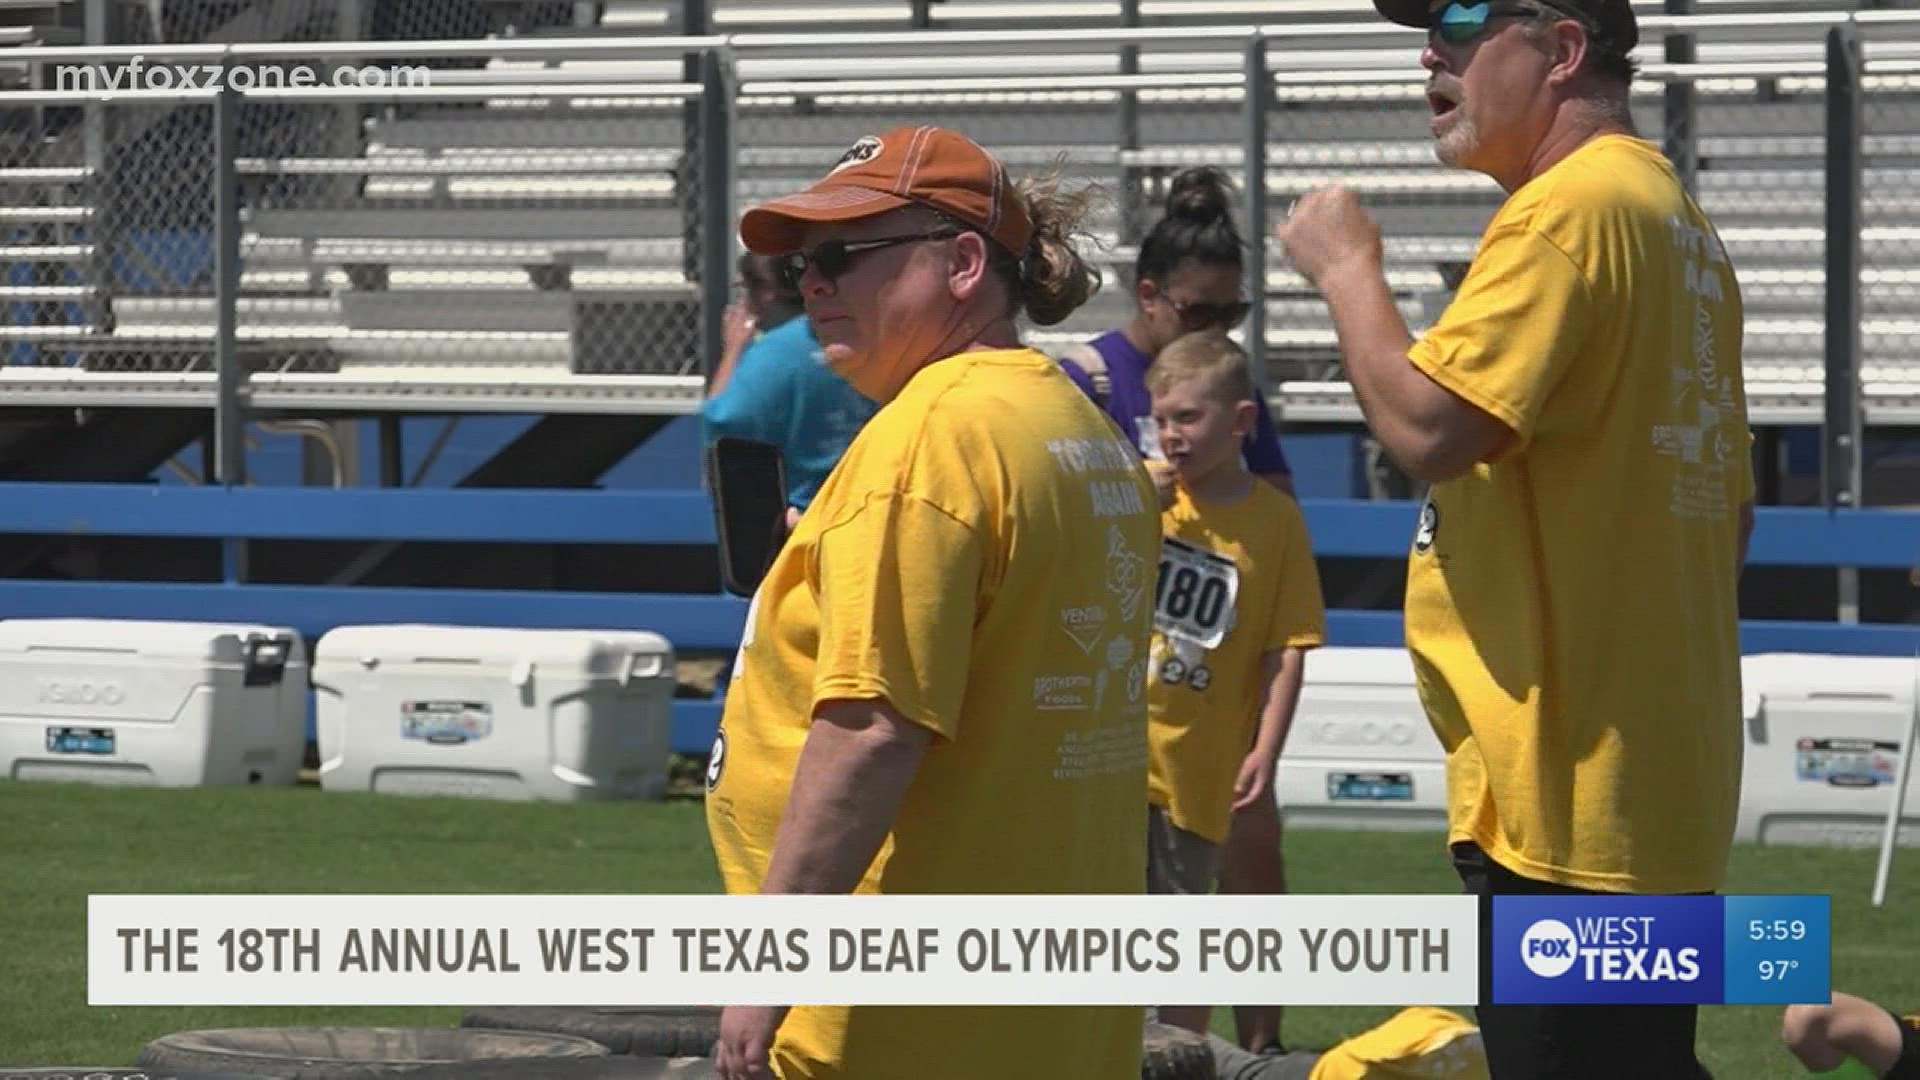 Deaf children and teenagers were able to compete in competitions and win prizes.